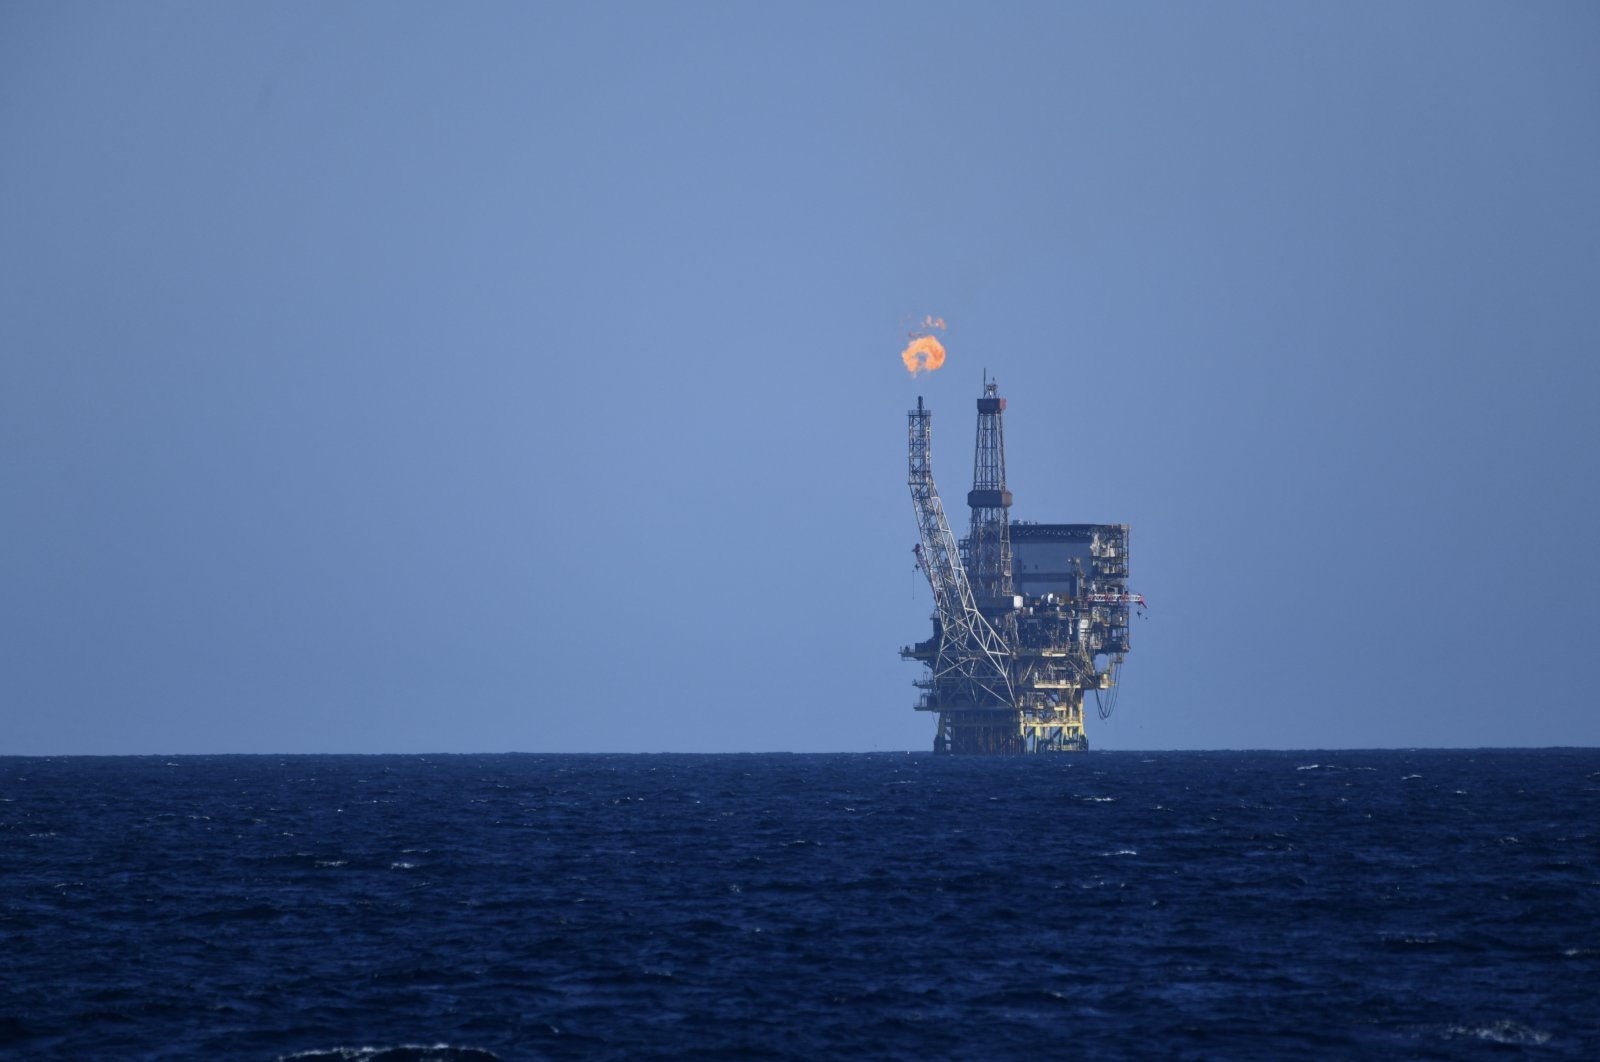 An oil and gas platform off the coast of Libya in the Mediterranean in the area of the Bahr Essalam Gas Field and Bouri Oilfield, Feb. 25, 2022. (REUTERS Photo)